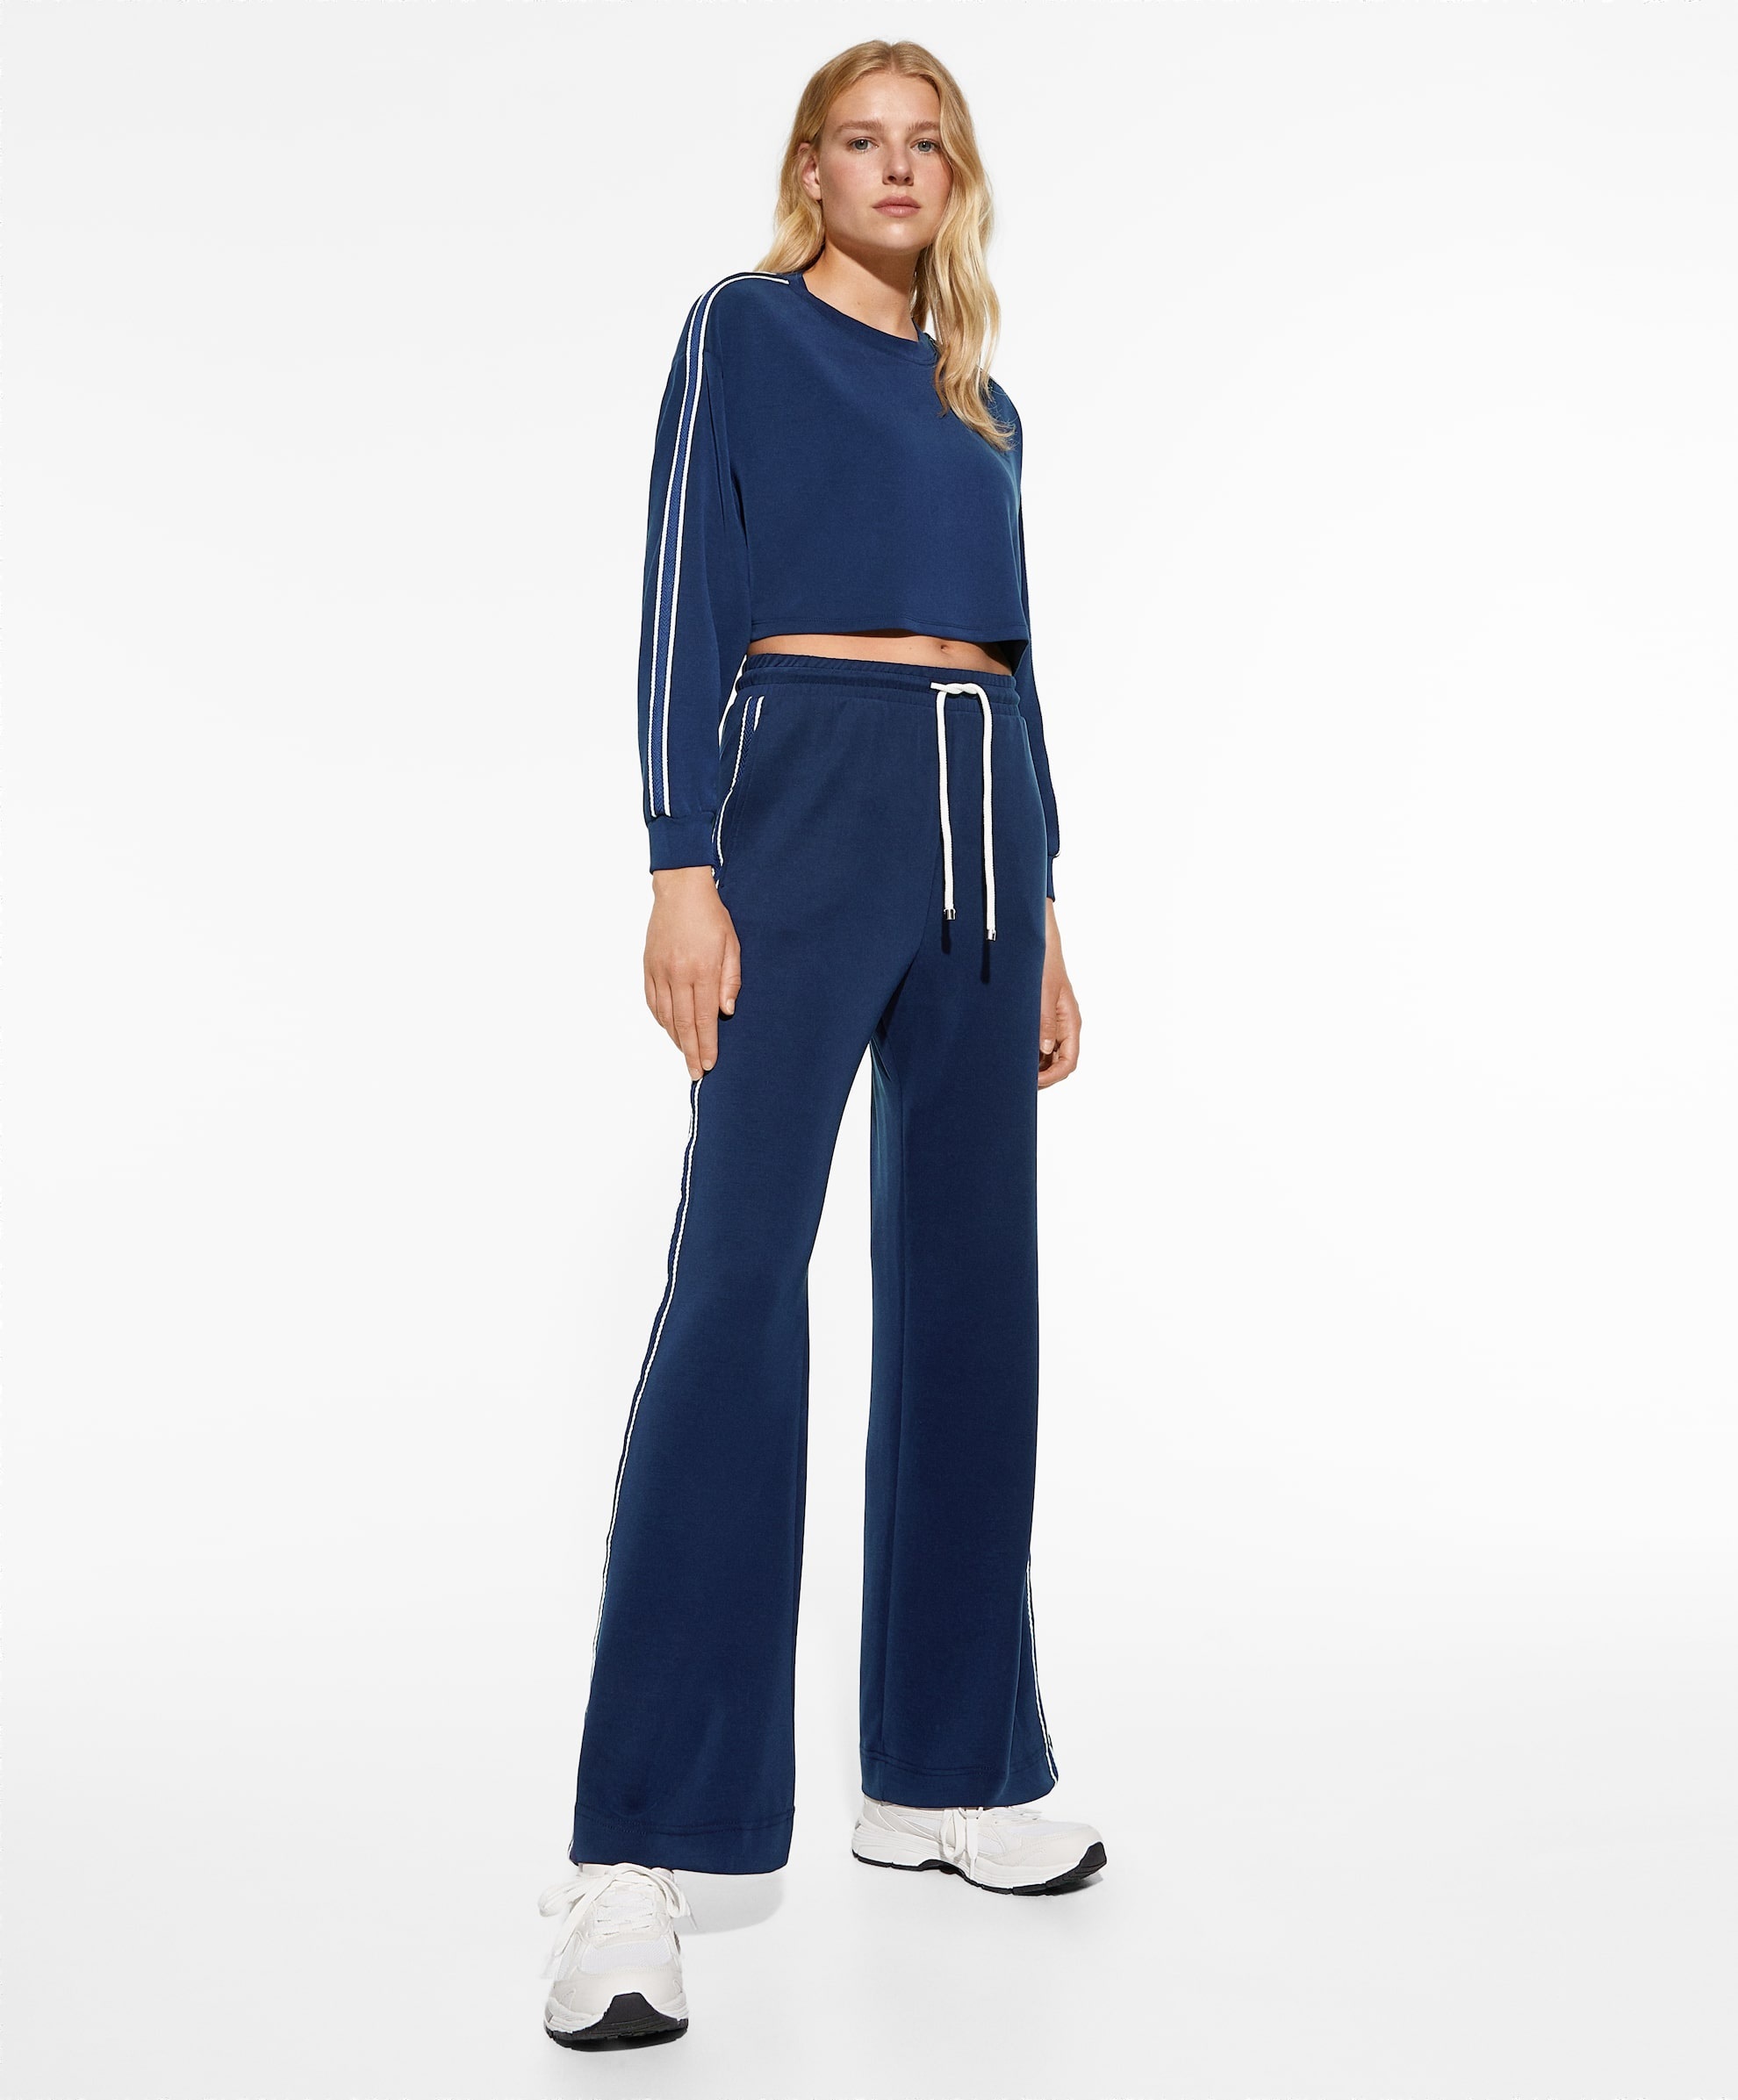 Tracksuit At The Airport?  Sporty And Comfortable Looks By Oysho, Inspired By Tamara Falcó.